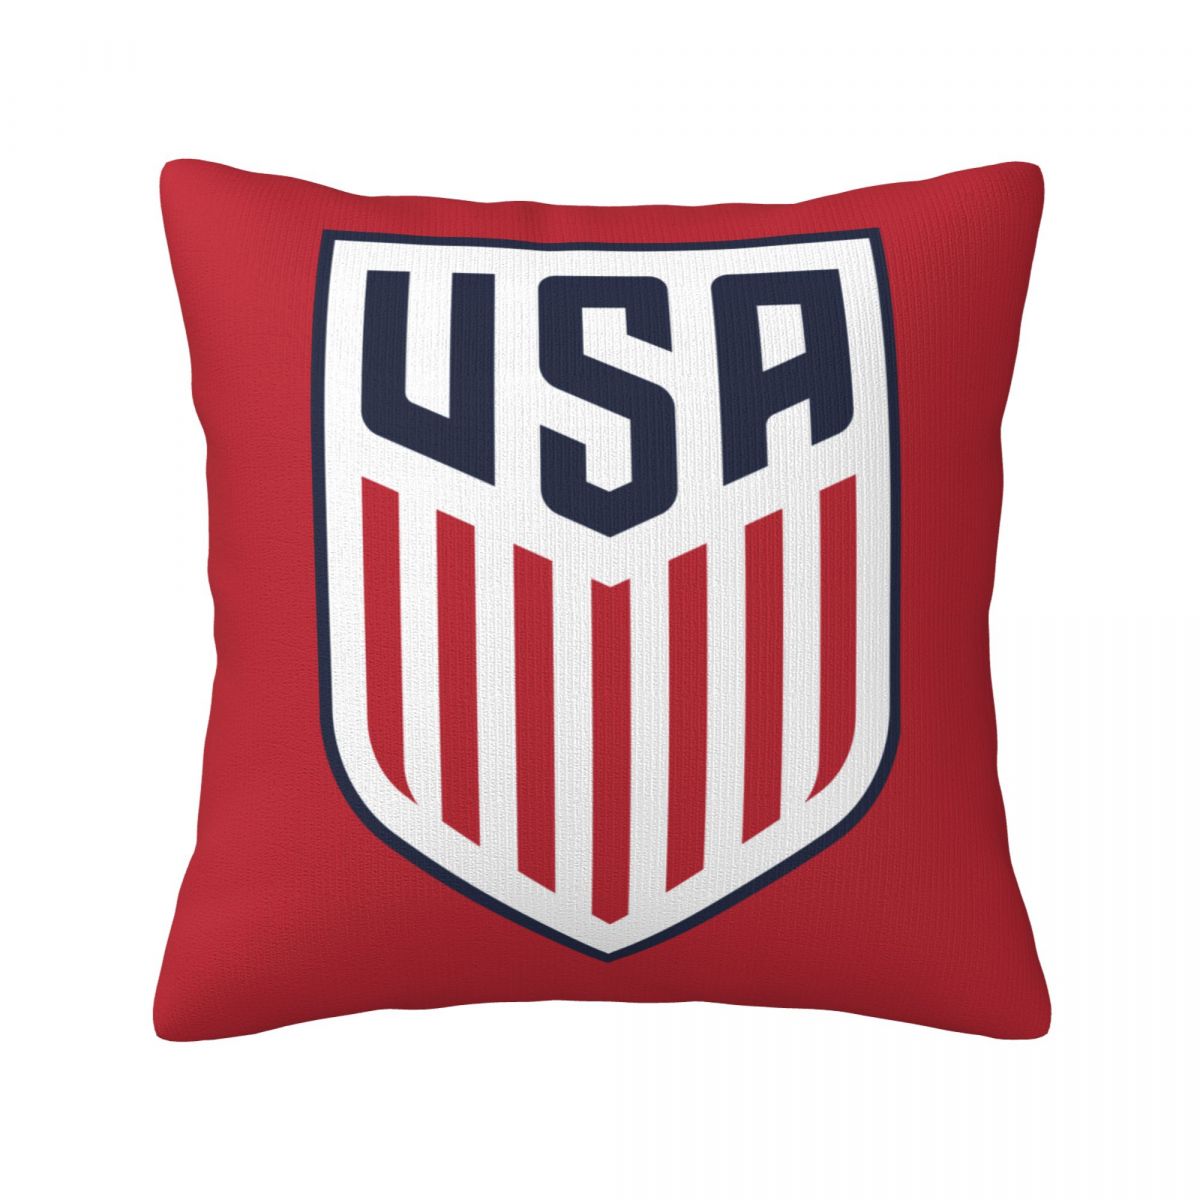 United States National Football Team Pillow Covers 18x18 Inch